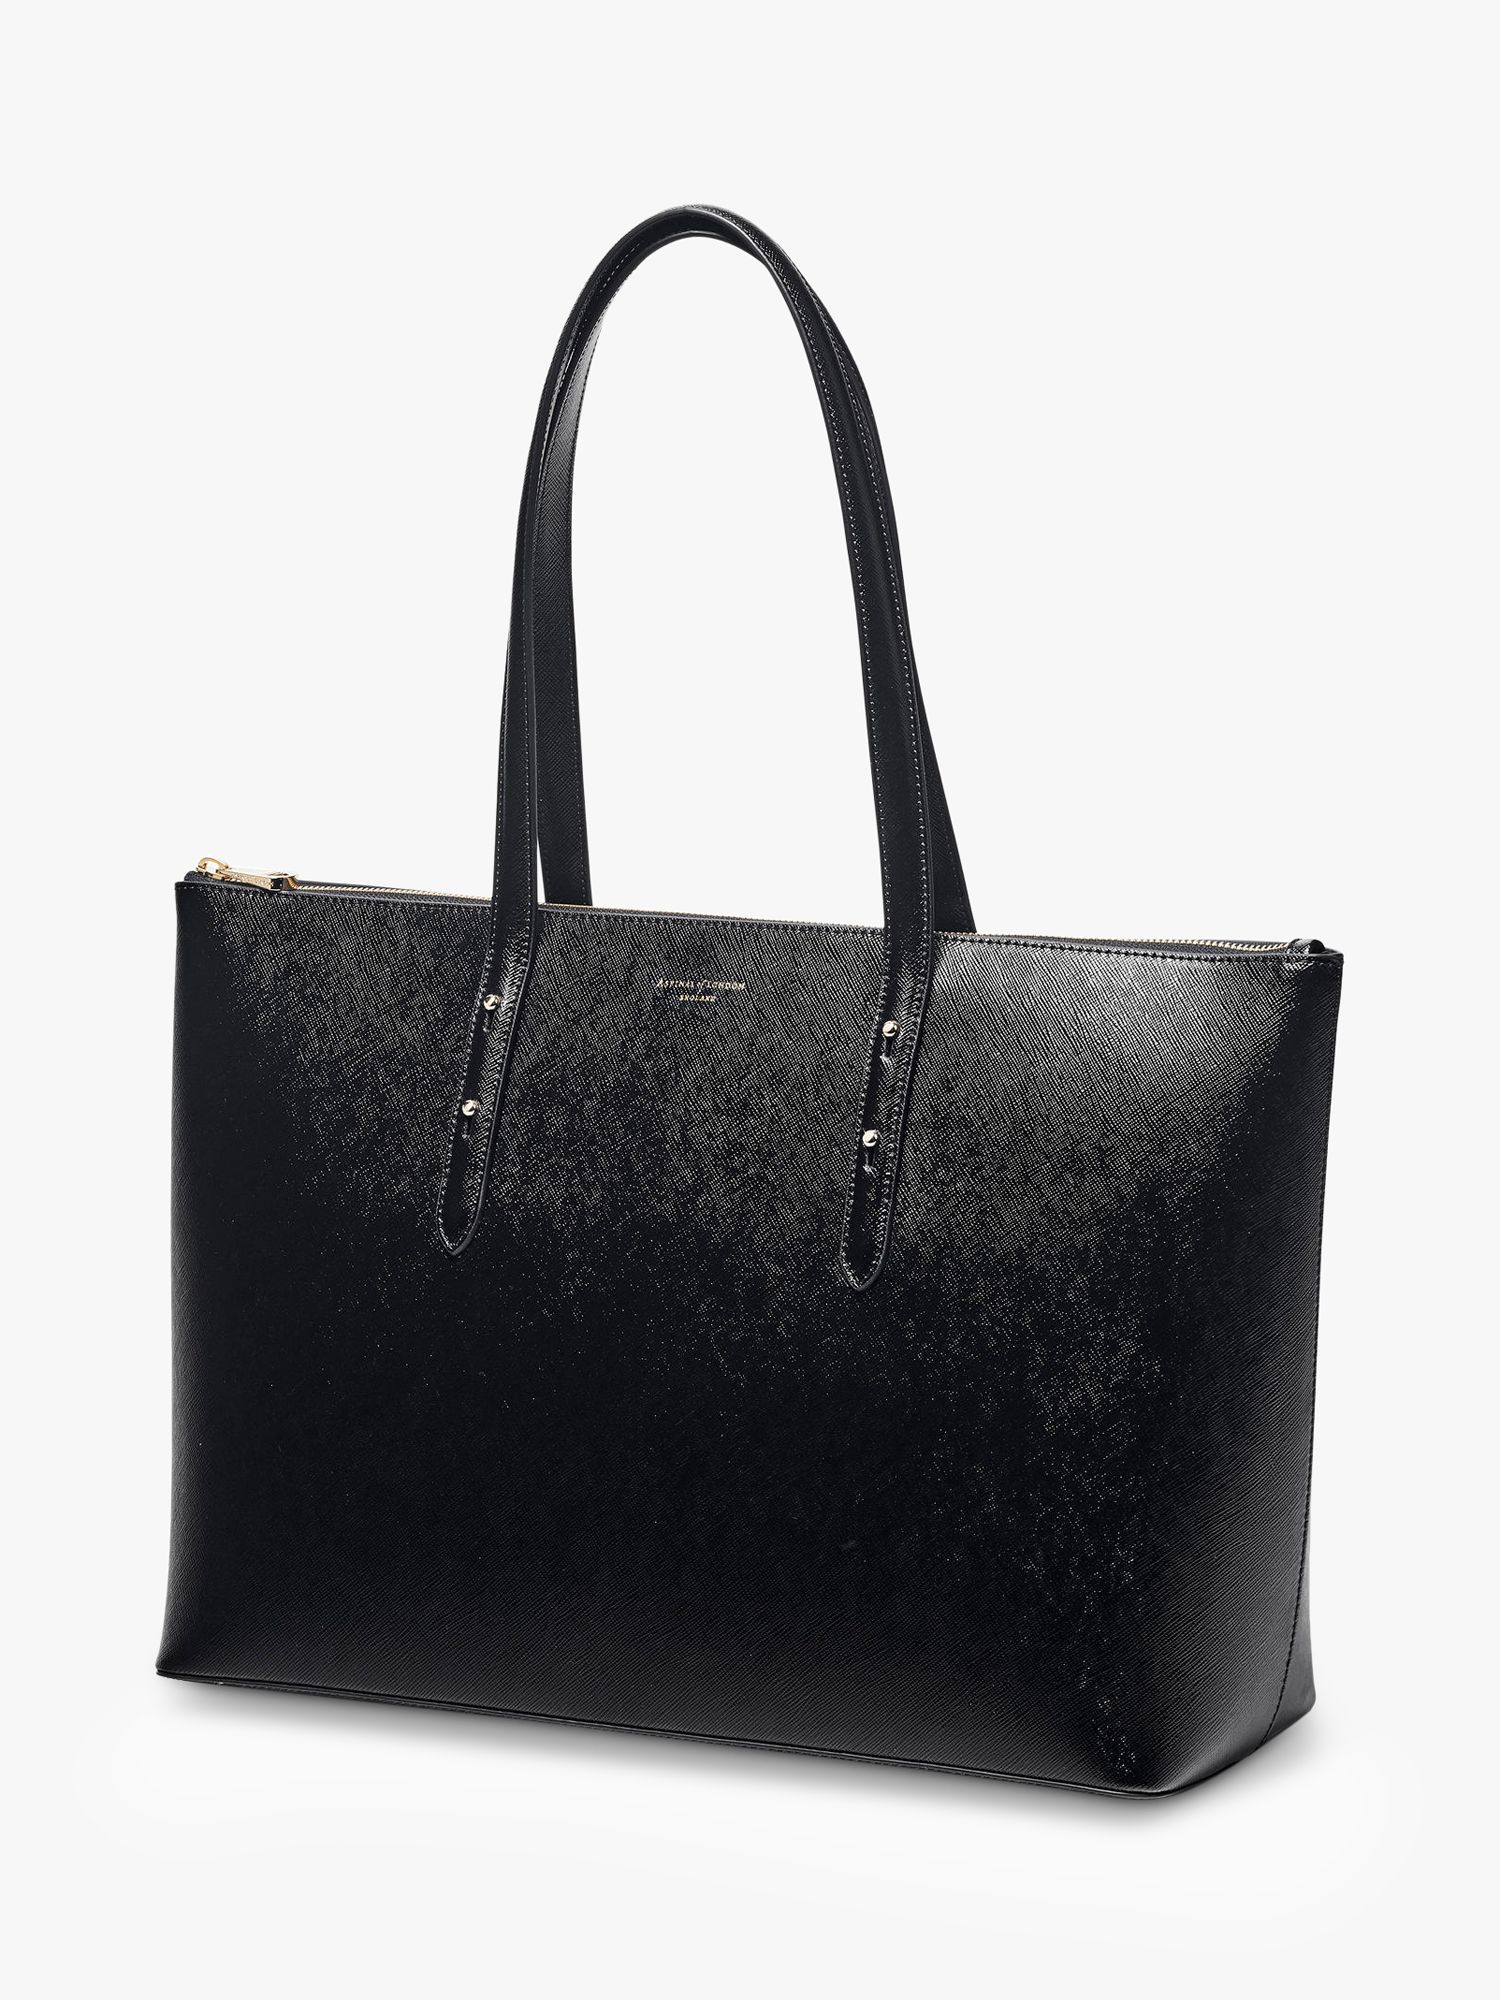 Aspinal of London Regent Saffiano Leather Zip-Top Tote Bag, Black